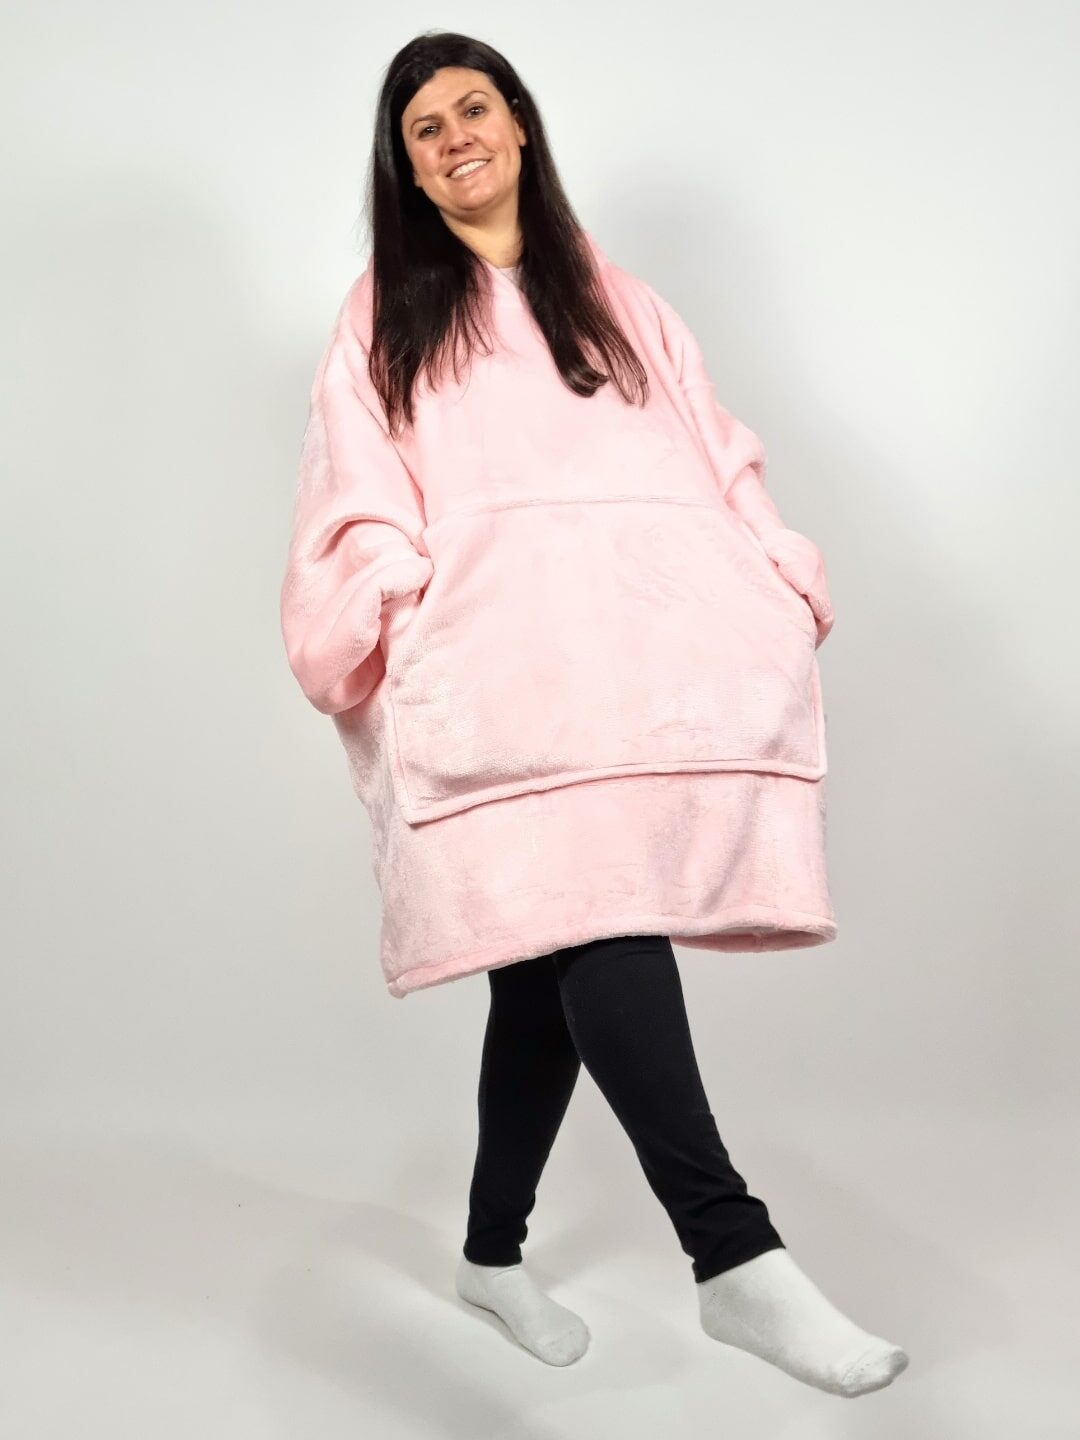 blanket hoodies Archives - The Snooby